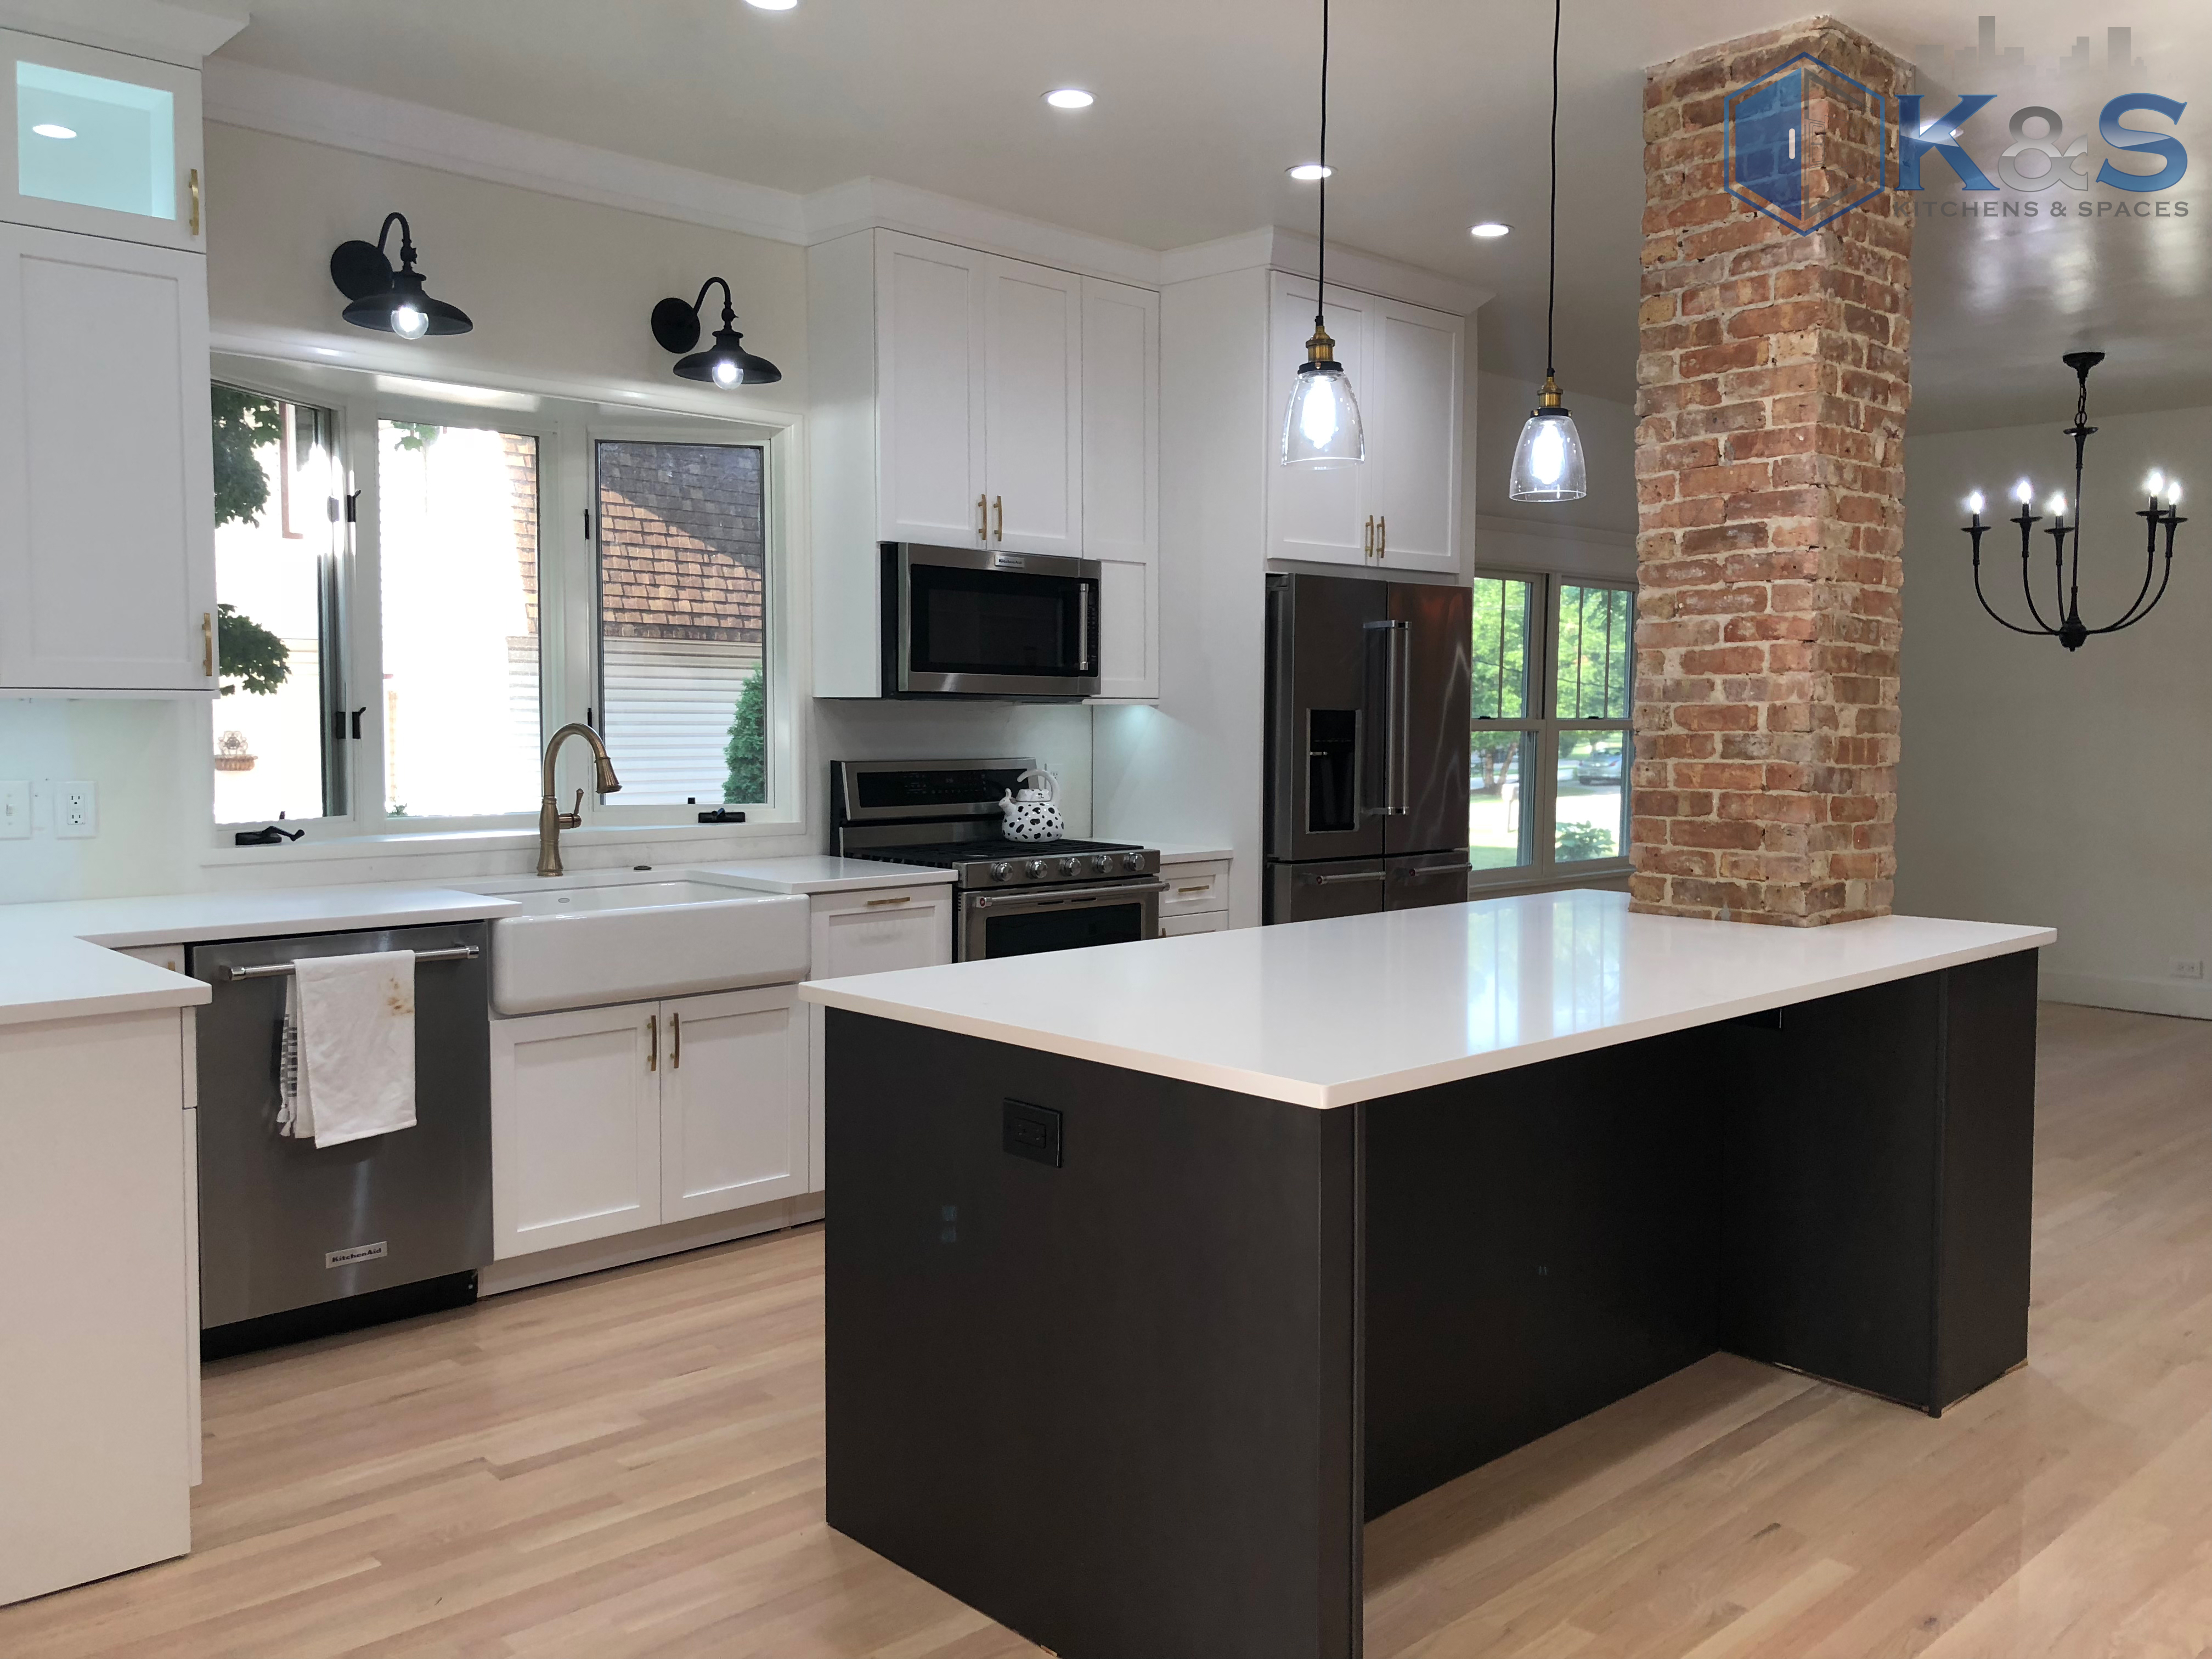  Kitchen Remodeling : Revitalize Your Space with an Imaginative Kitchen Renovation  thumbnail